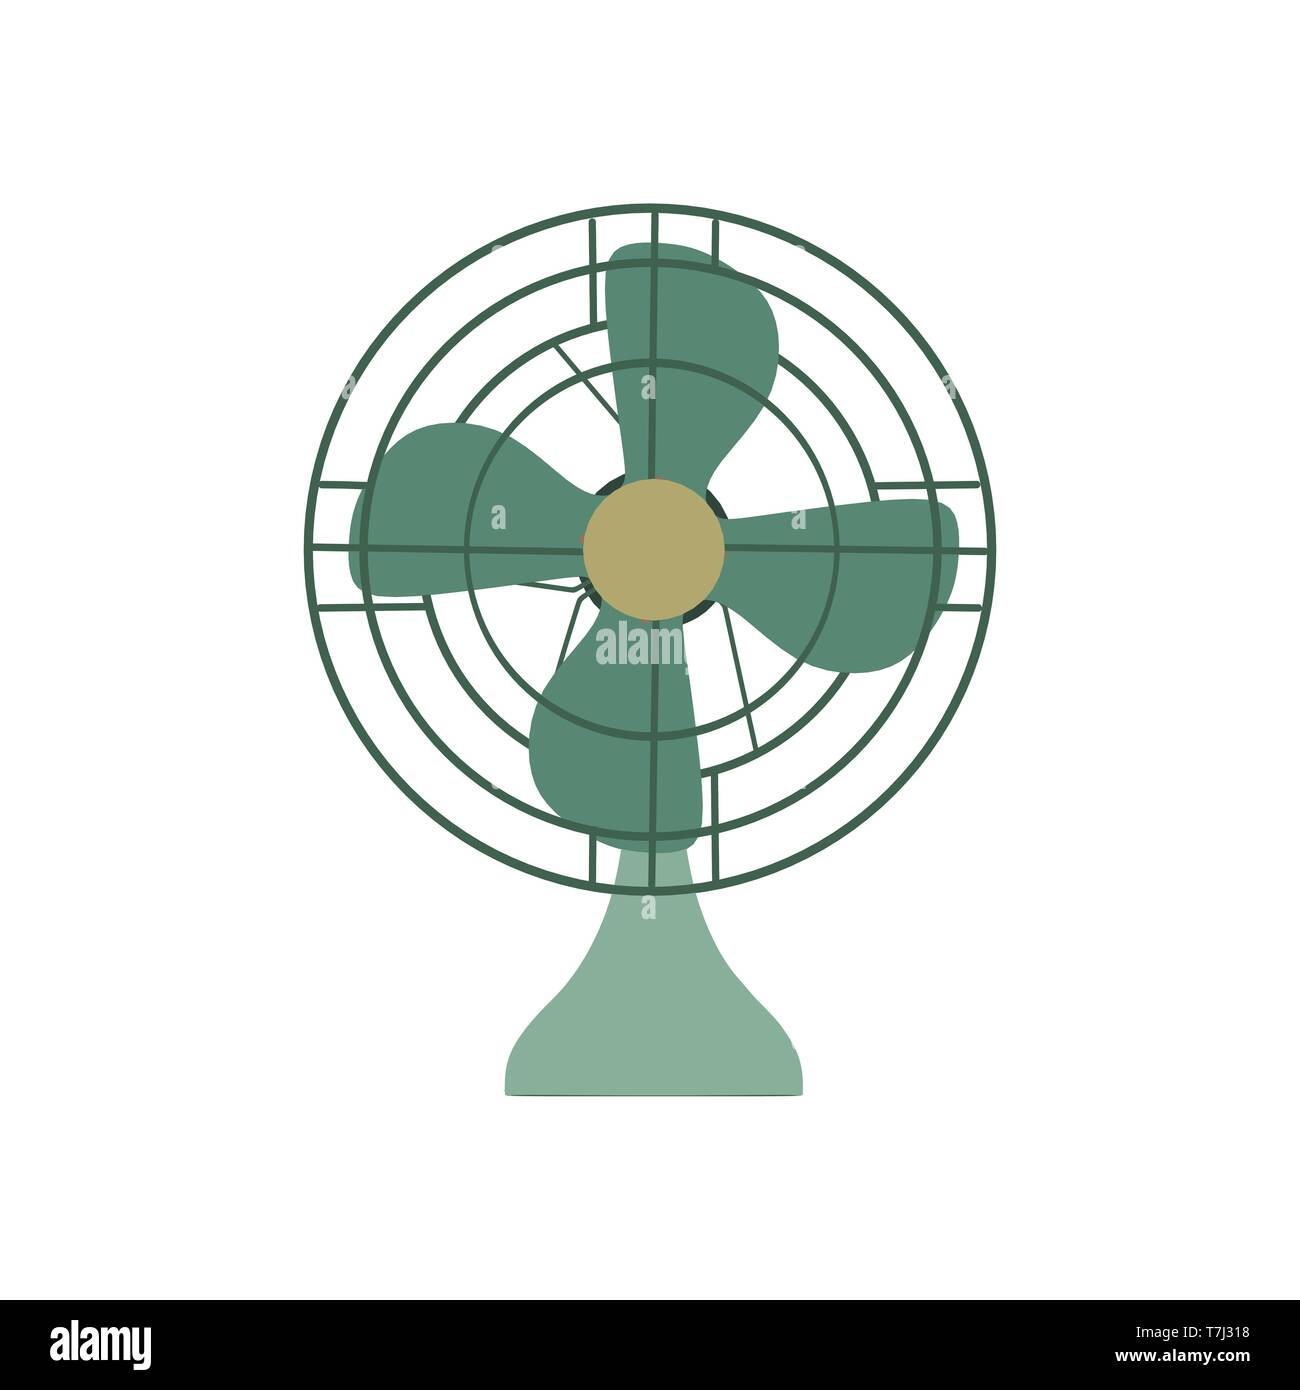 Vector Fan green electric front view design style. Circle symbol blower ceiling graphic element ventilation blade icon. Wind airflow silhouette air si Stock Vector